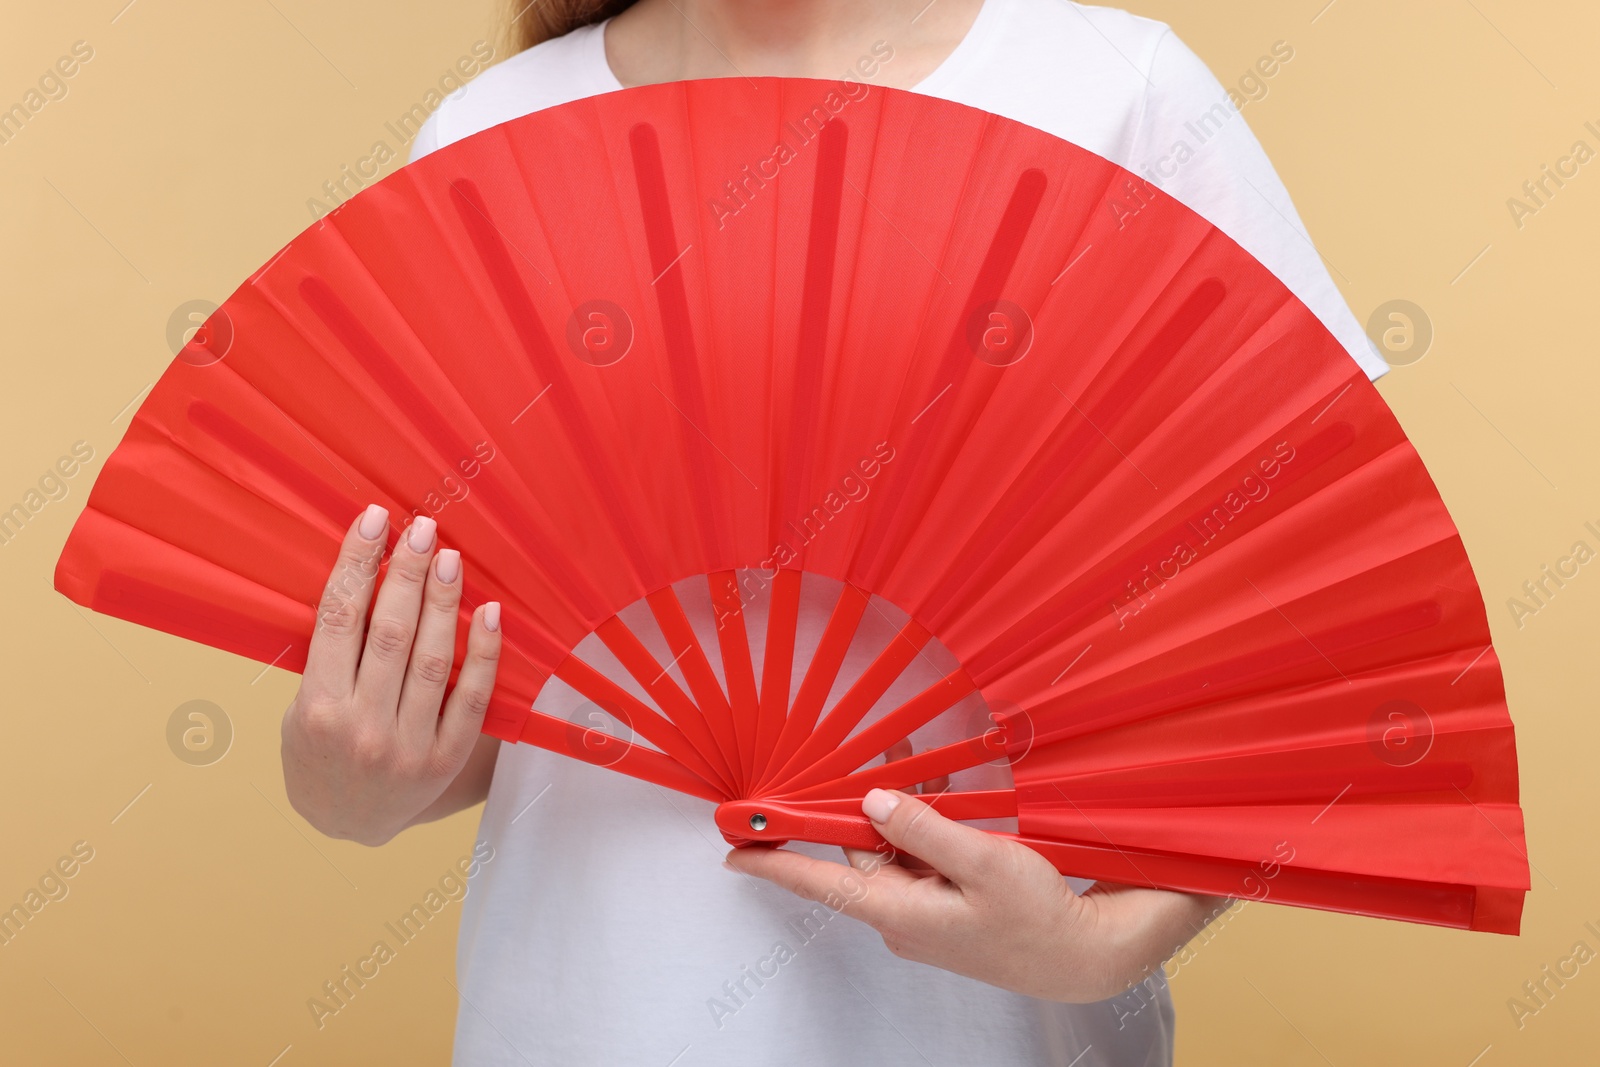 Photo of Woman with red hand fan on beige background, closeup